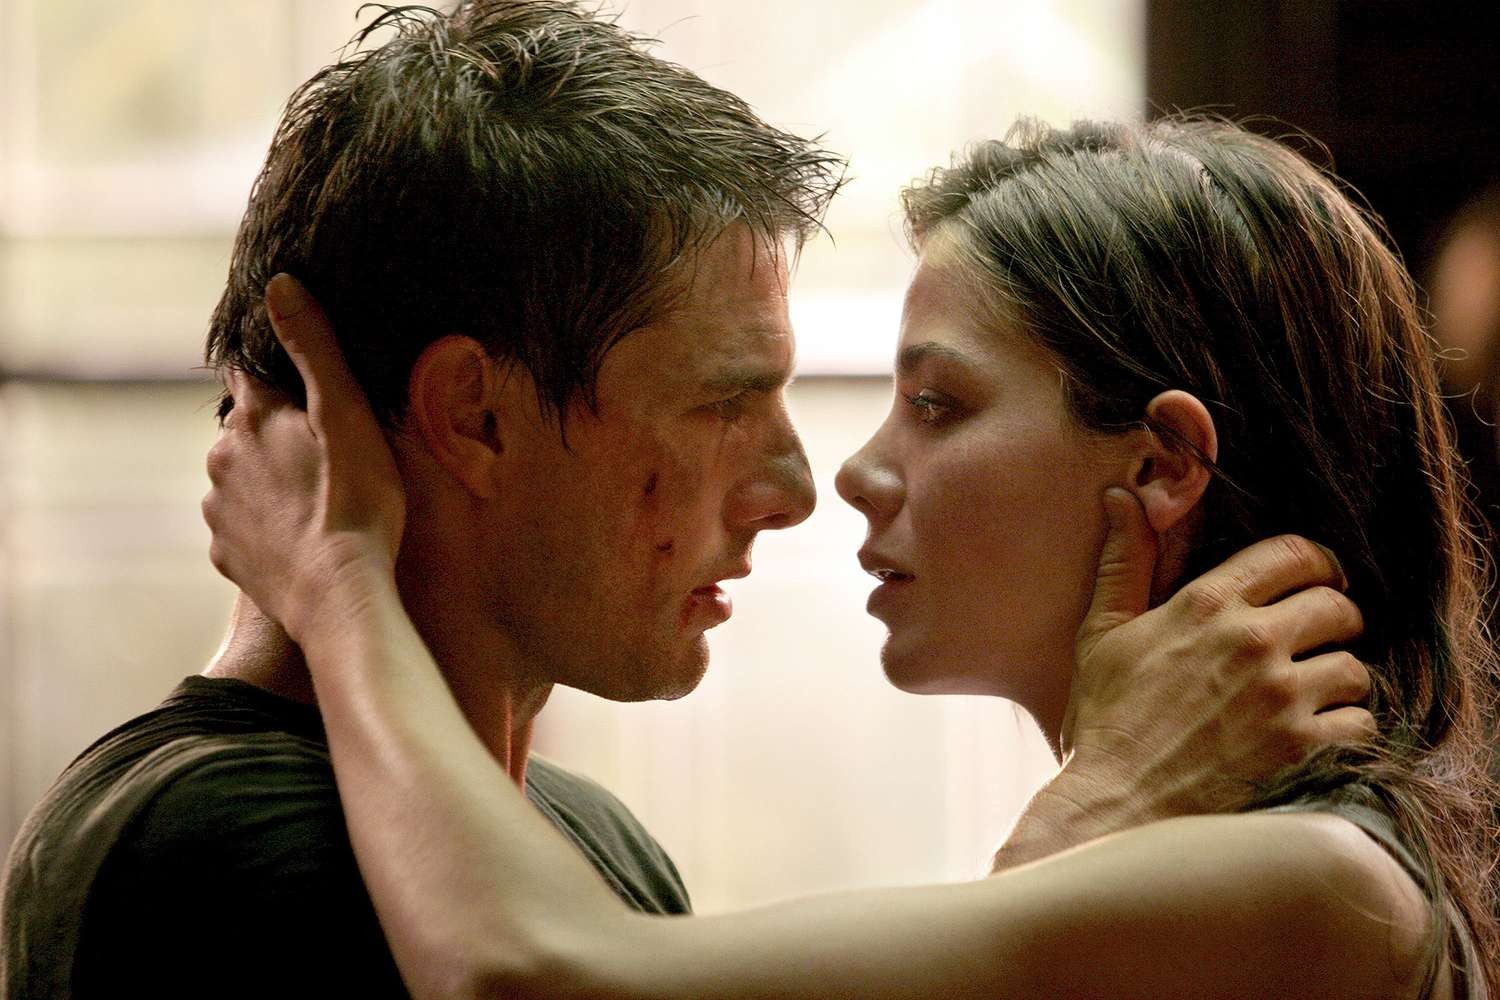 Michelle Monaghan and Tom Cruise in Mission: Impossible III